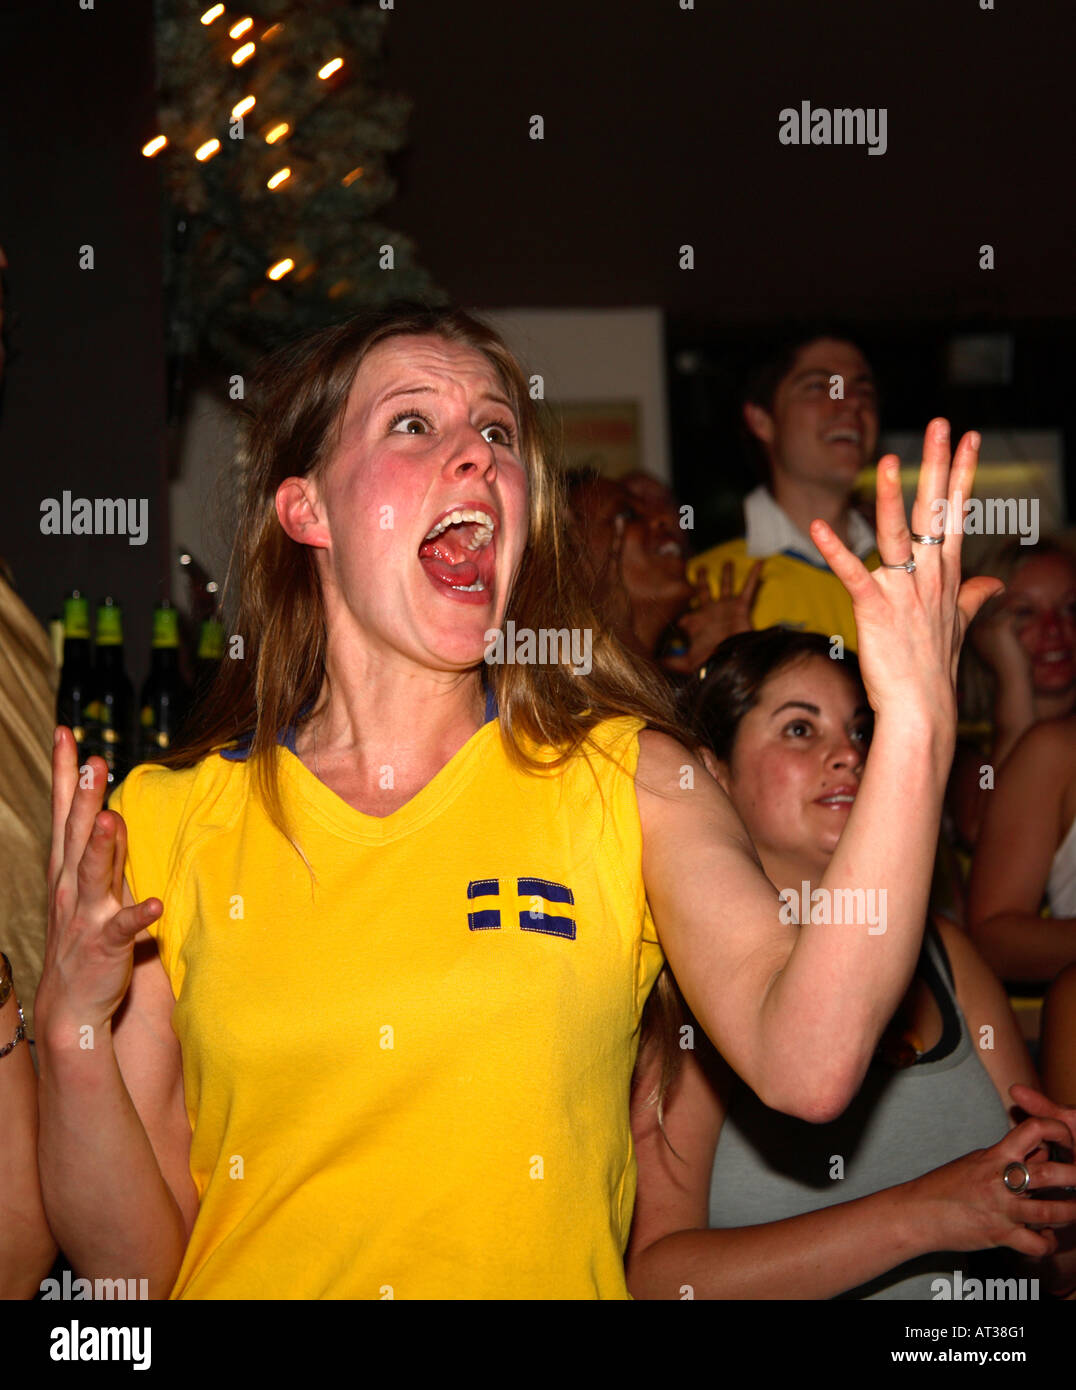 Female Swedish fans watching Sweden's opening game vs Trinidad & Tobago, World Cup 2006, Nordic Bar, London Stock Photo